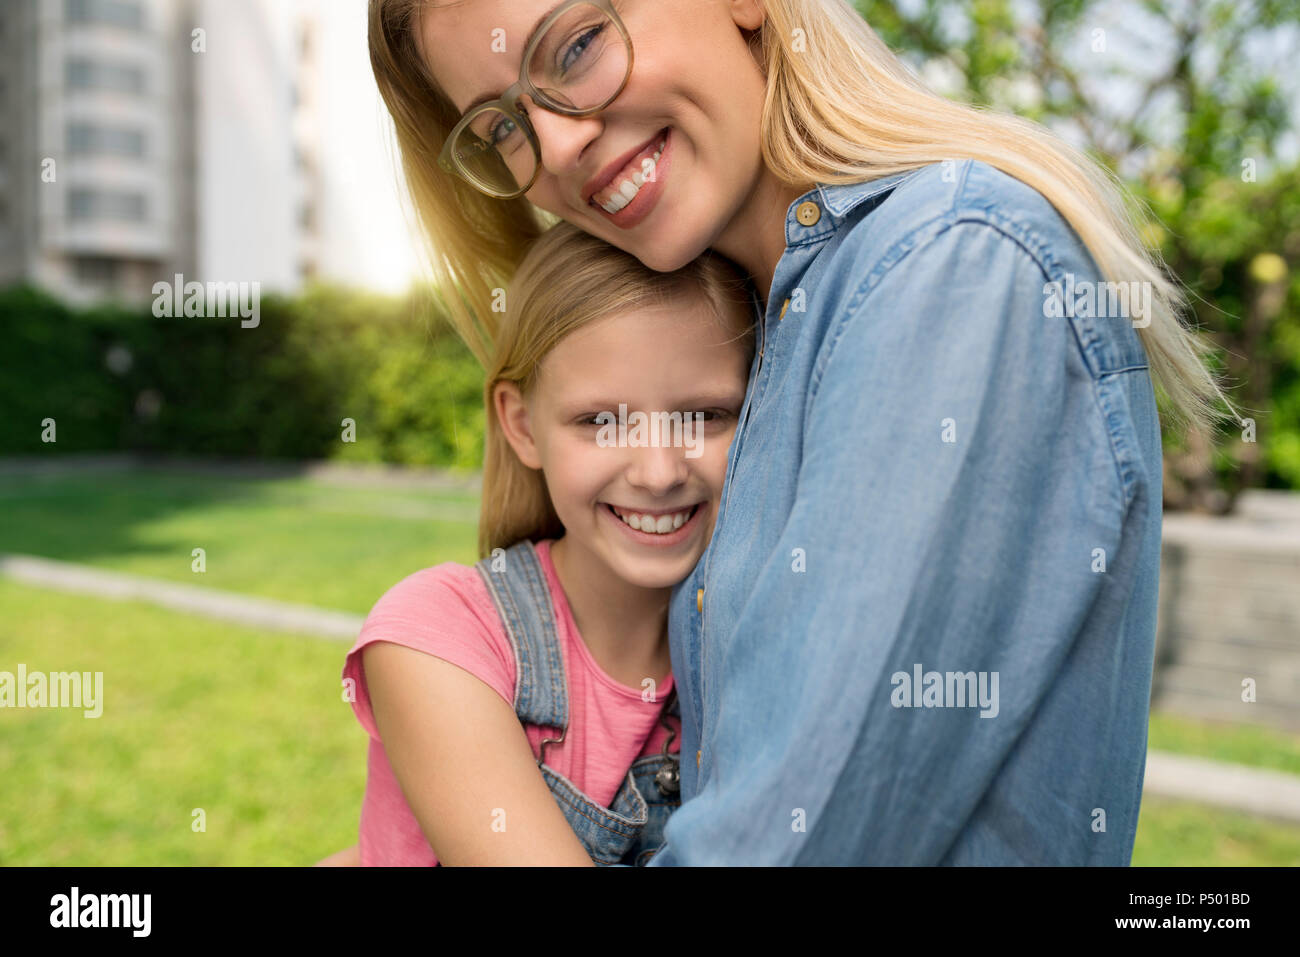 Happy mother and daughter hugging and smiling in urban city garden Banque D'Images